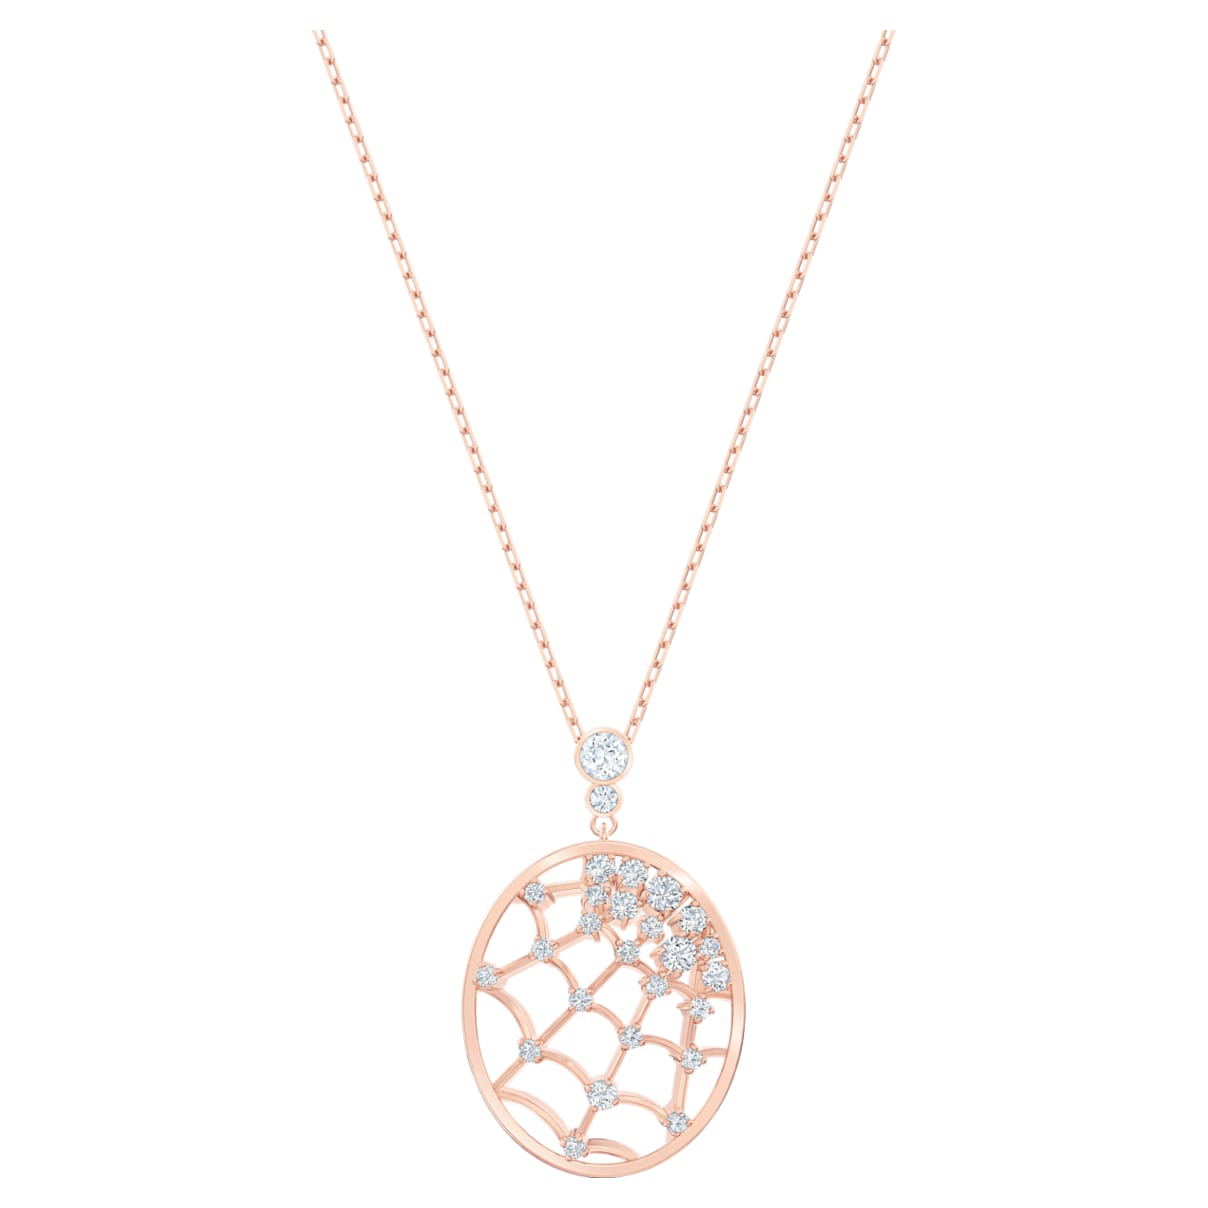 Precisely Pendant White, Rose-gold tone plated